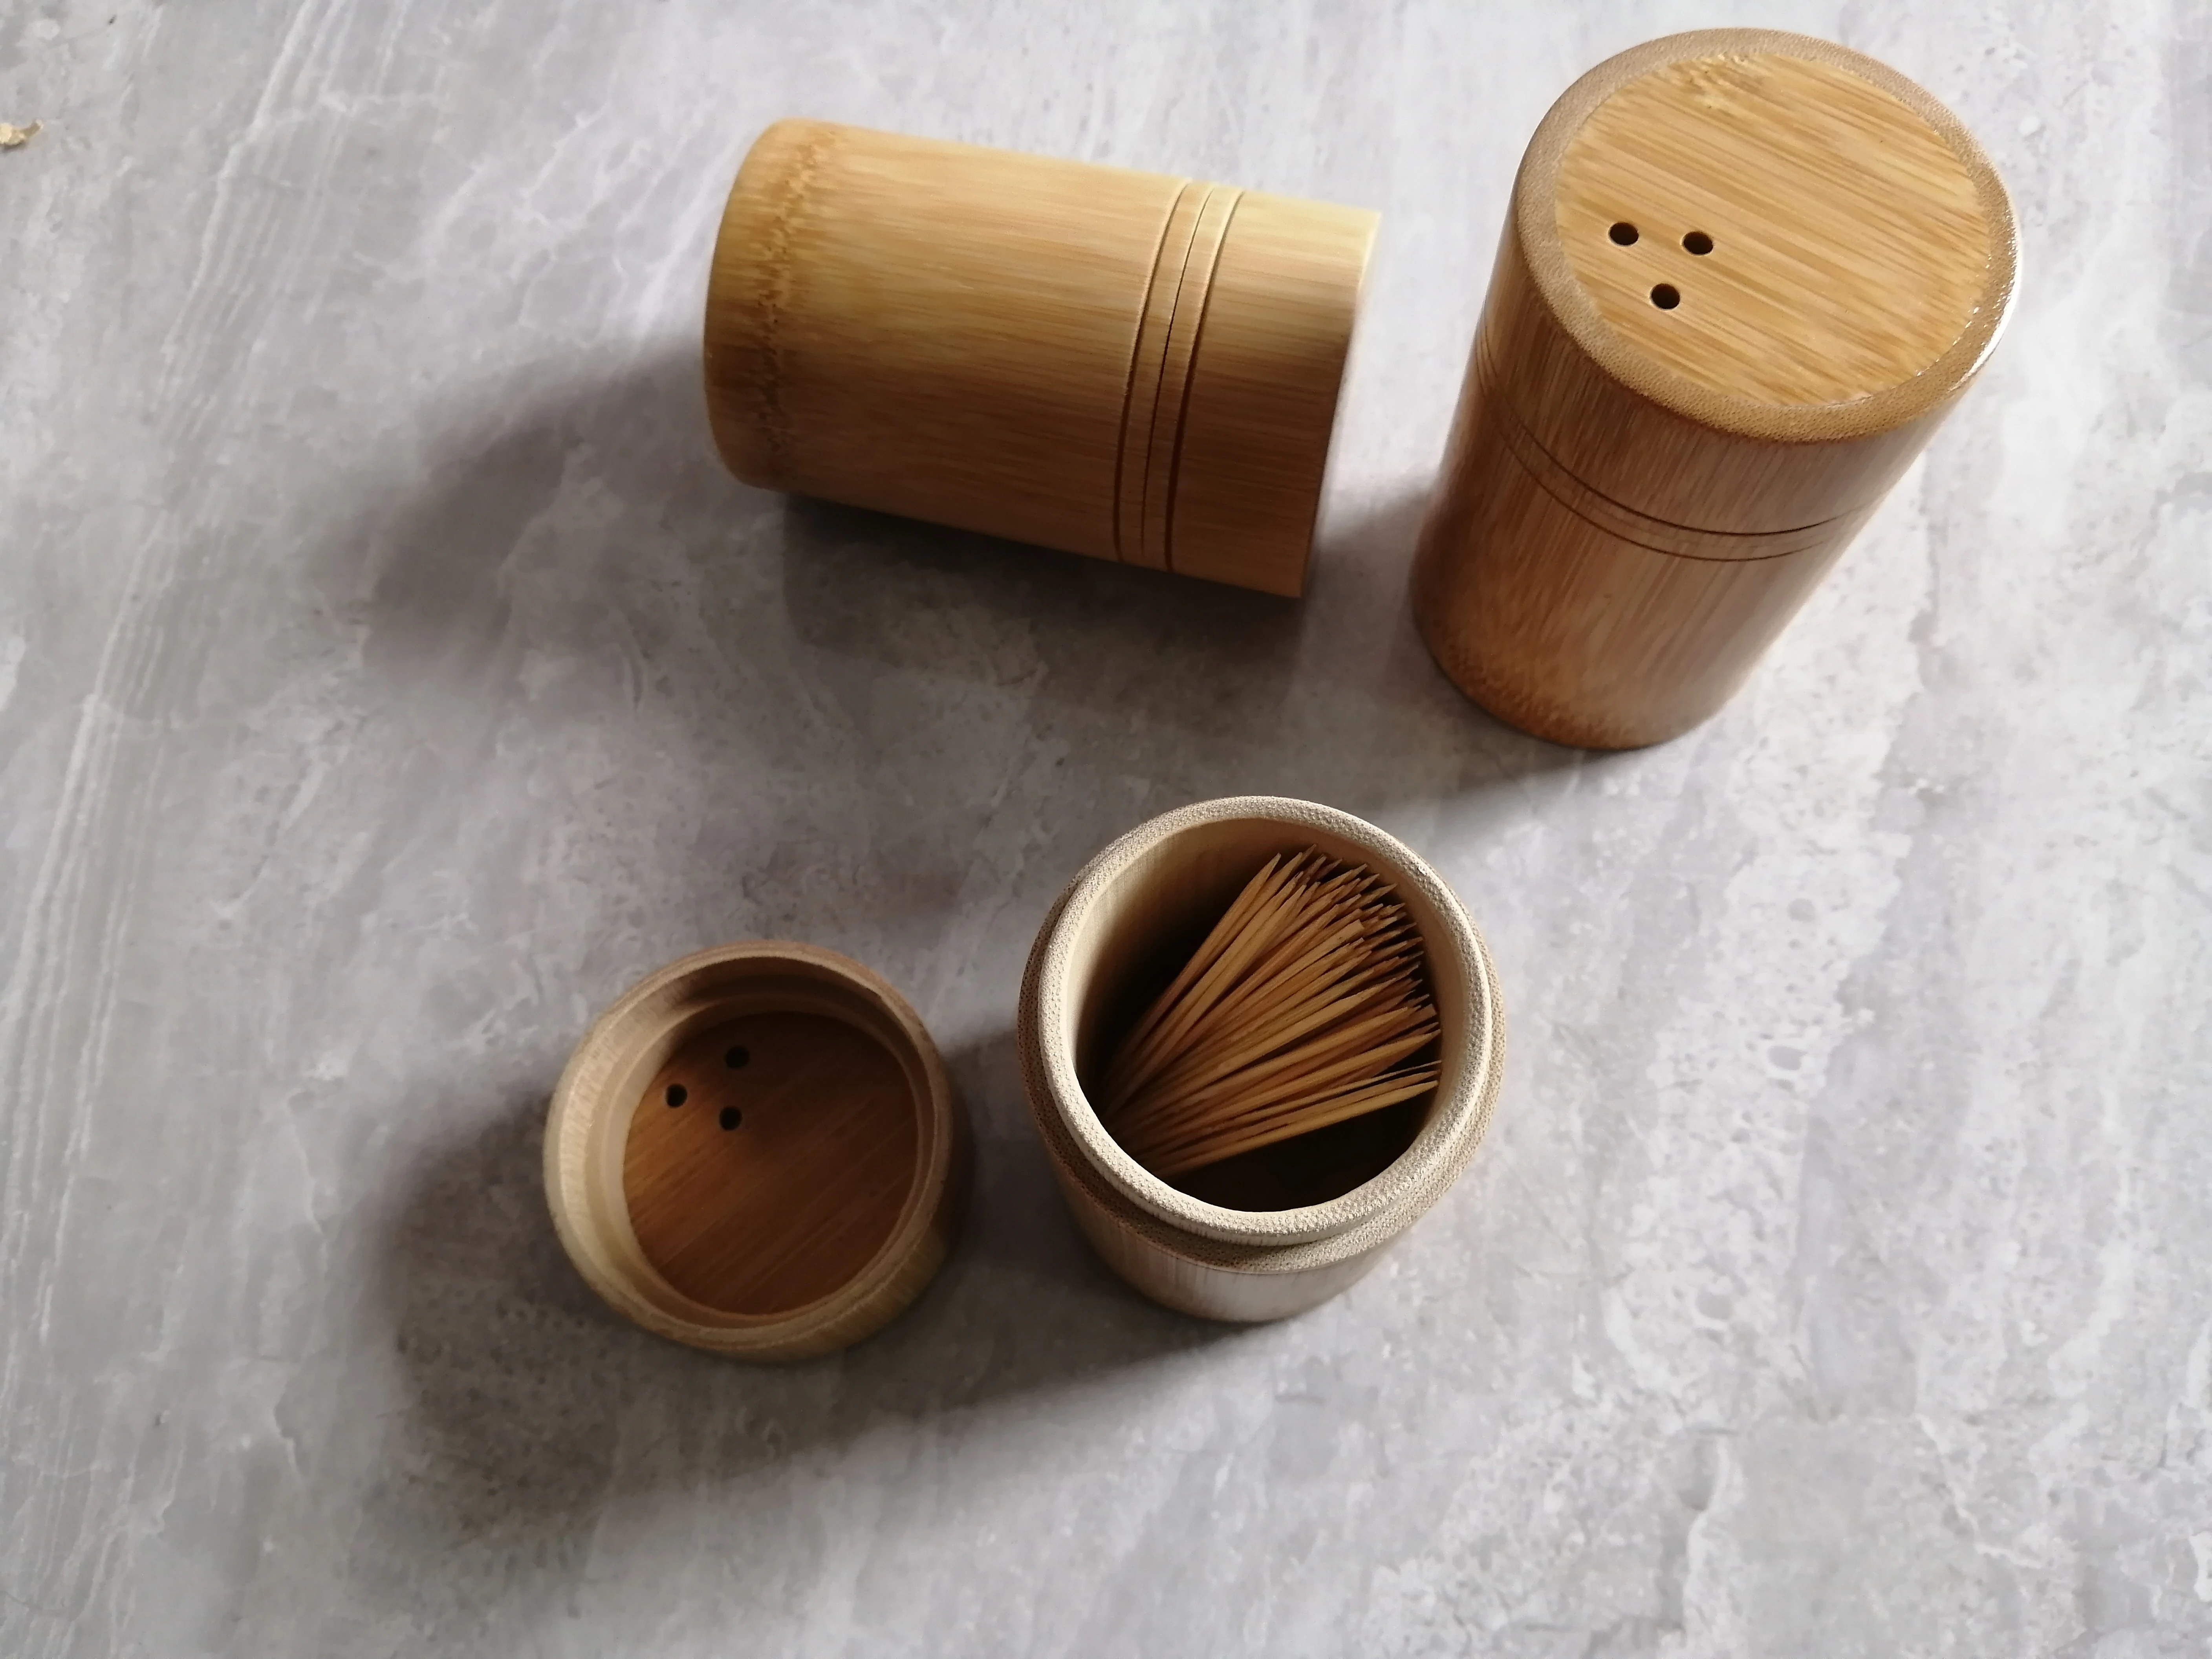 Promotion of new products in 2020, bamboo crafts, toothpick boxes for toothpick utensils.